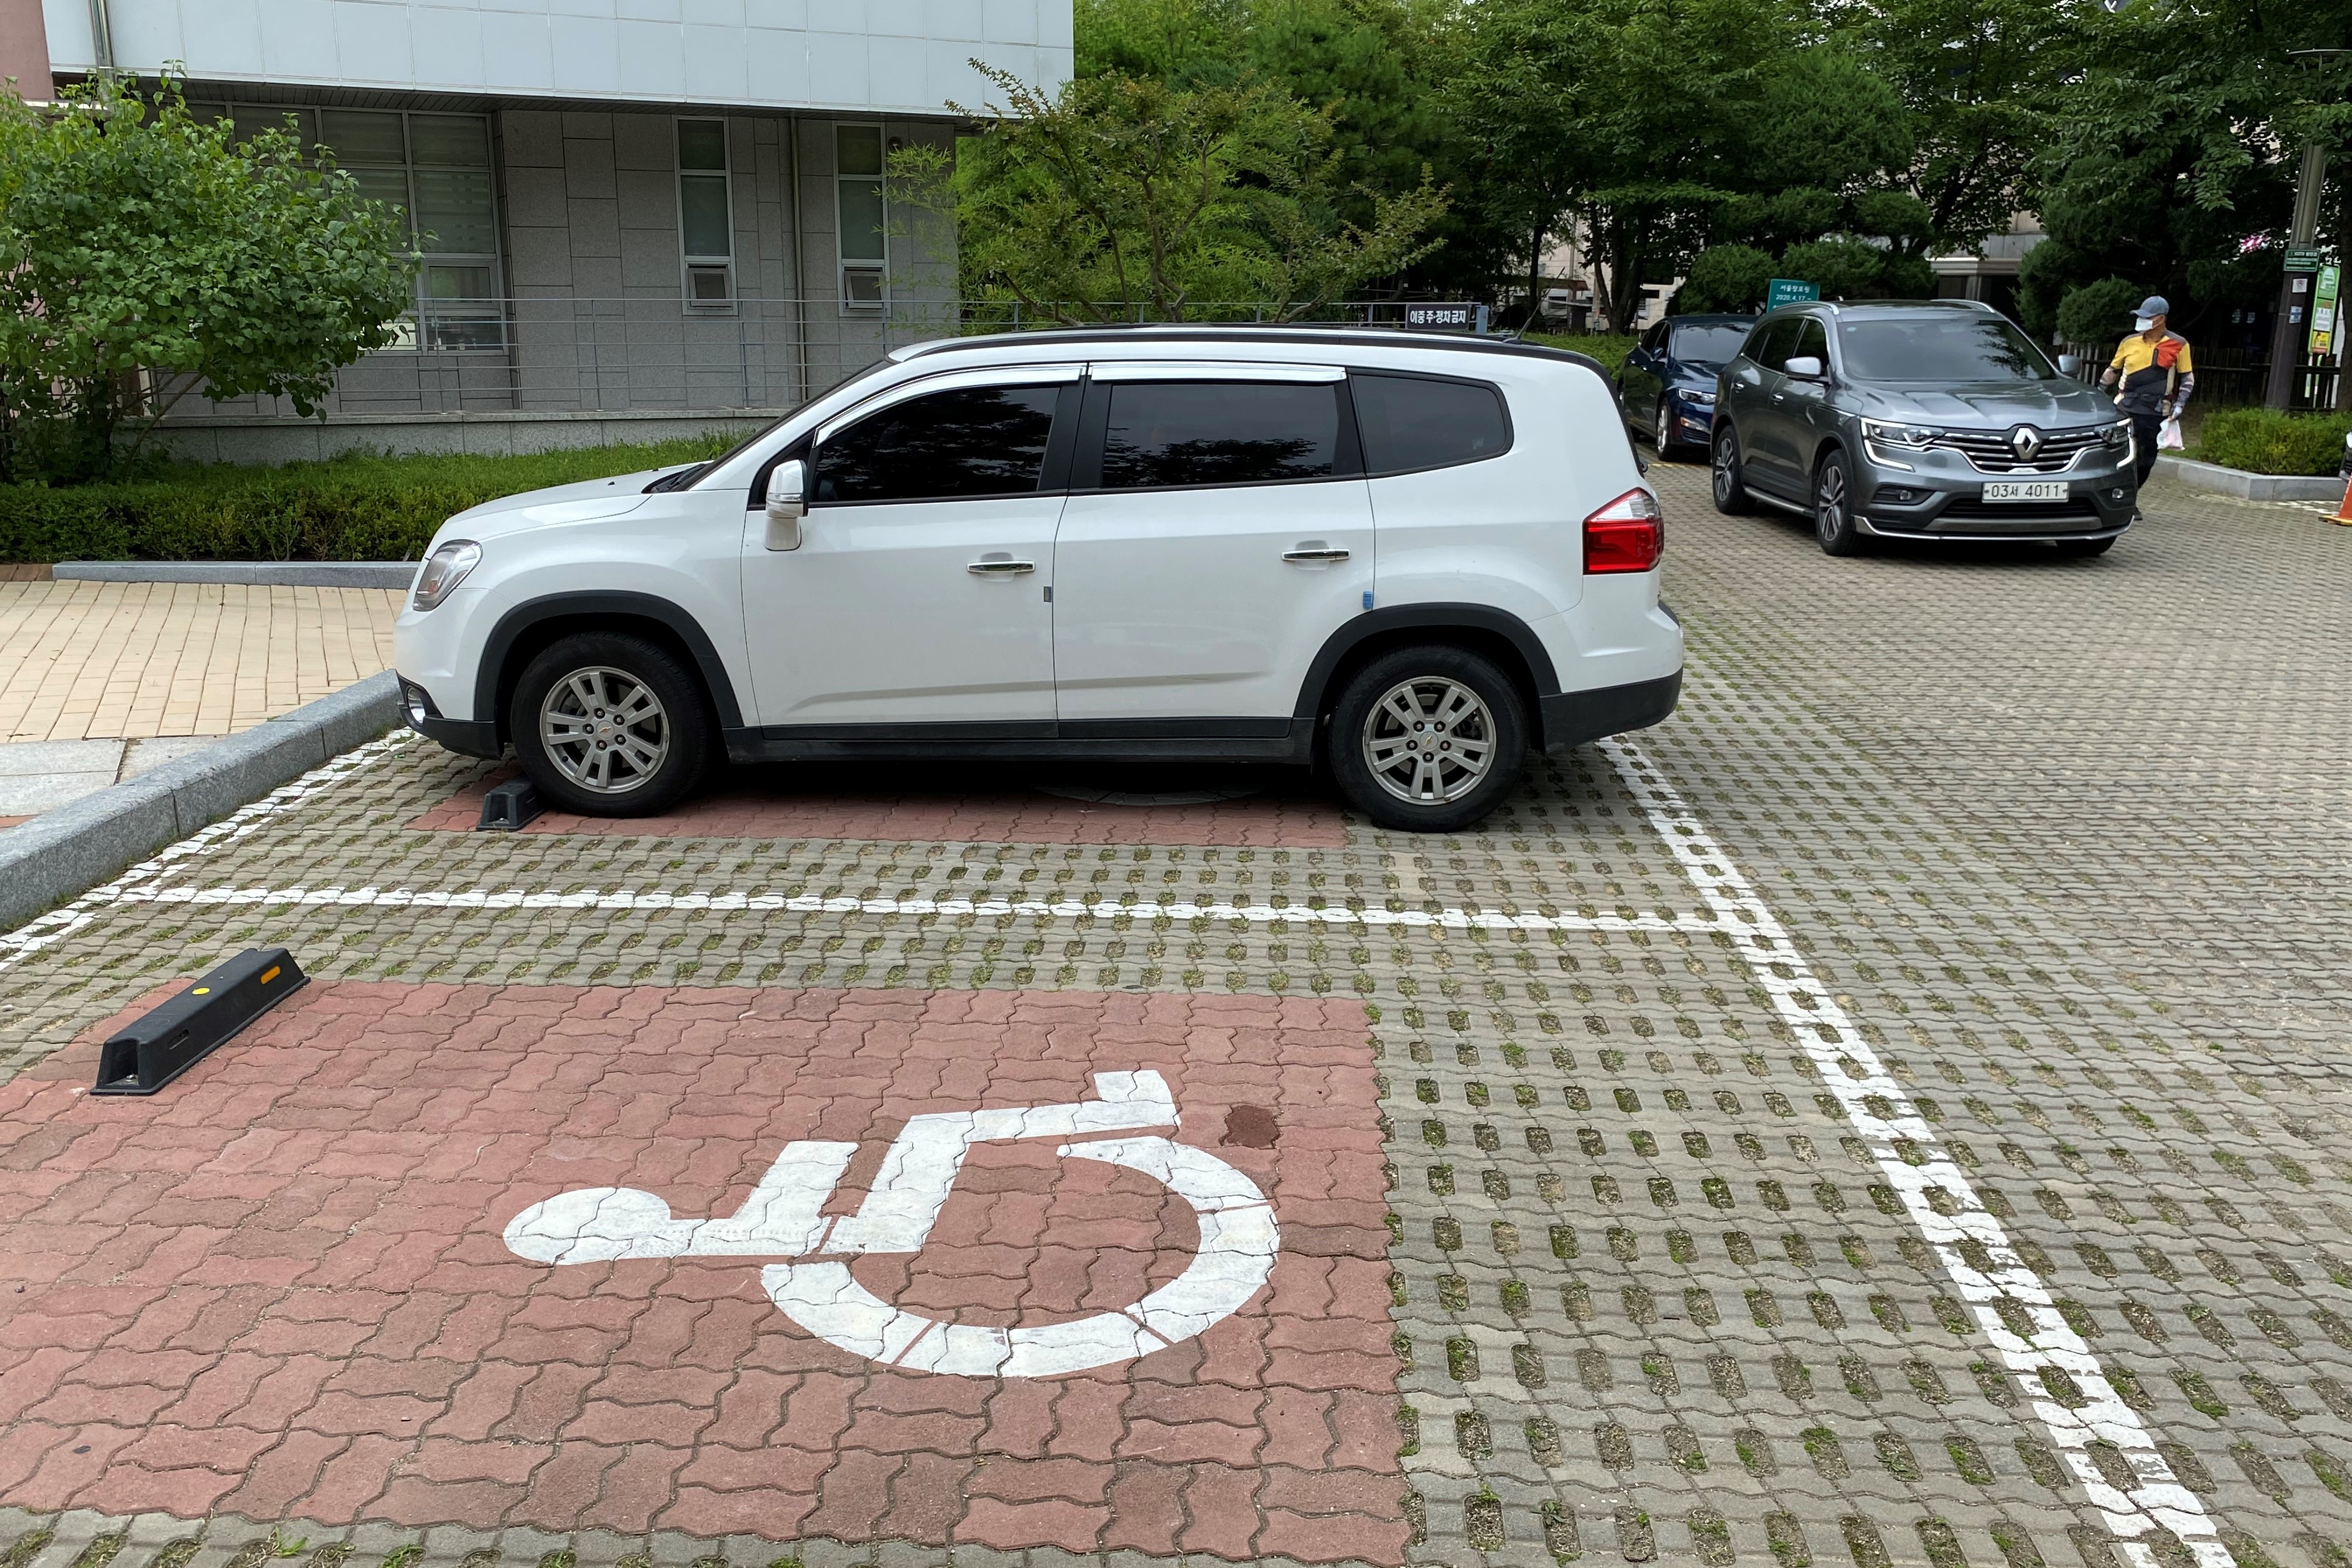 Accessible parking lots0 : Spacious and flat parking lots for wheelchair users 2